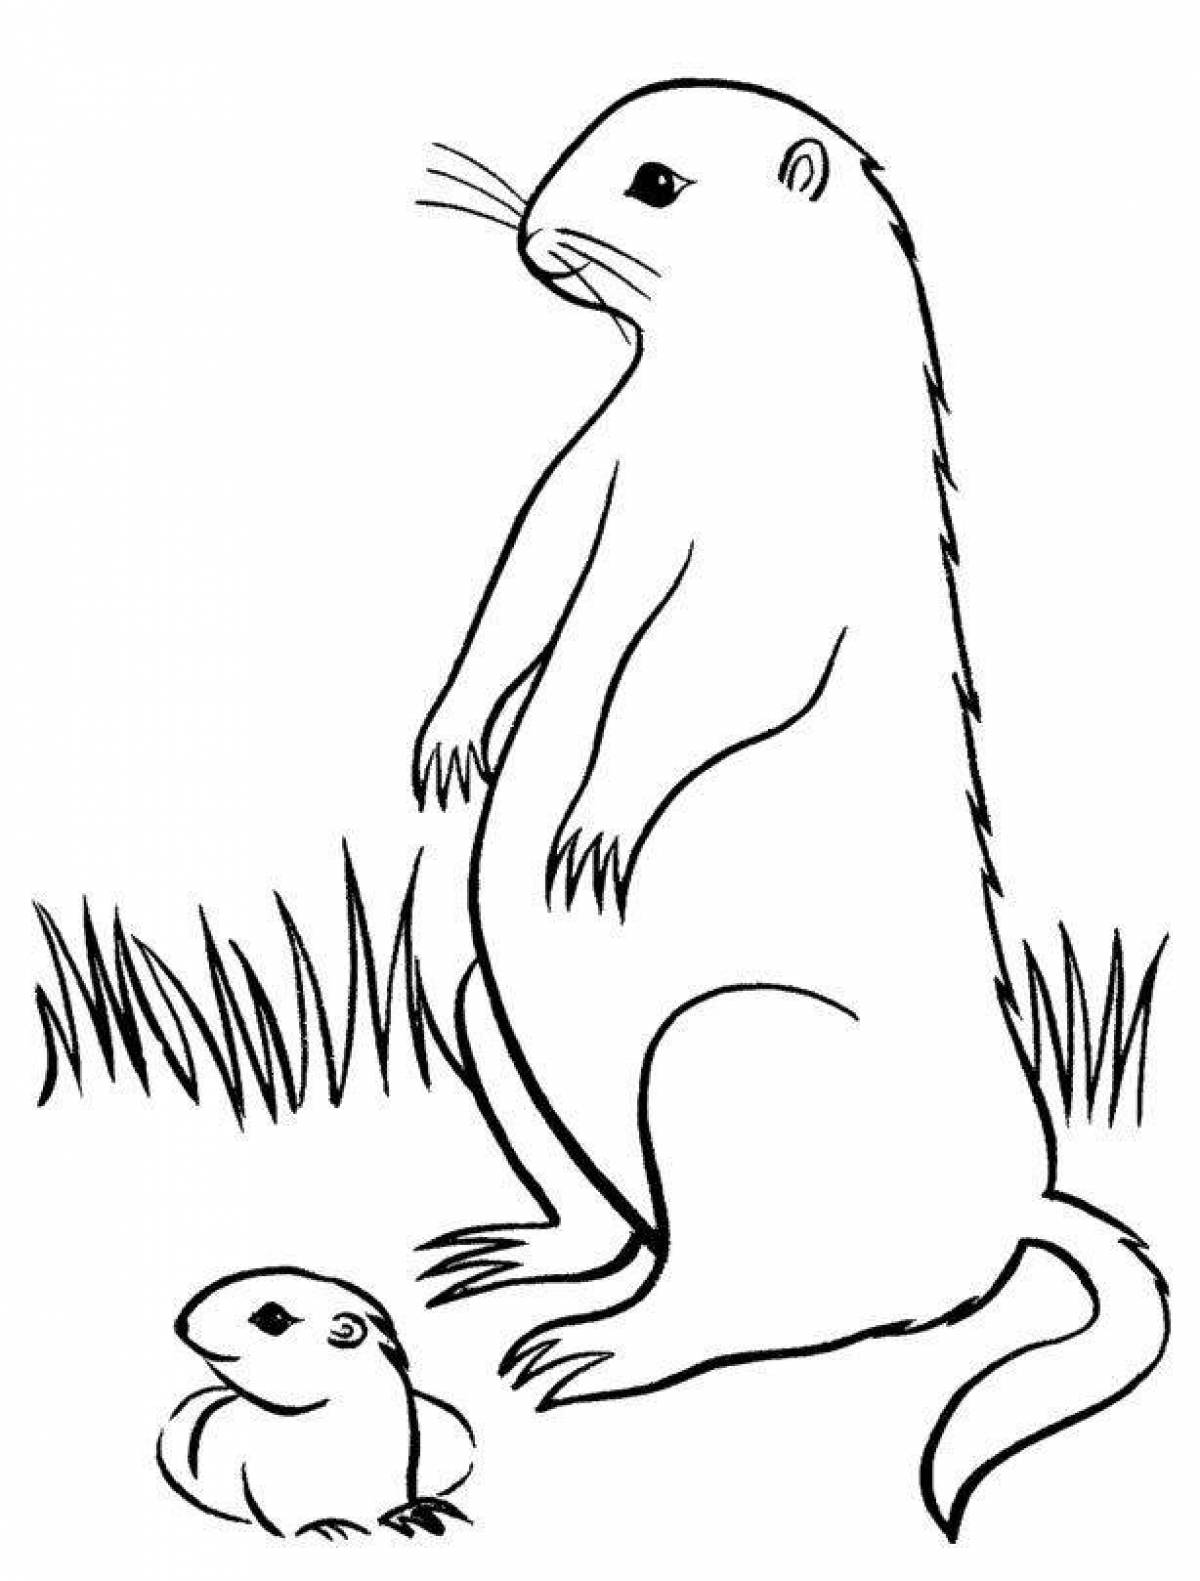 Cute gopher coloring page